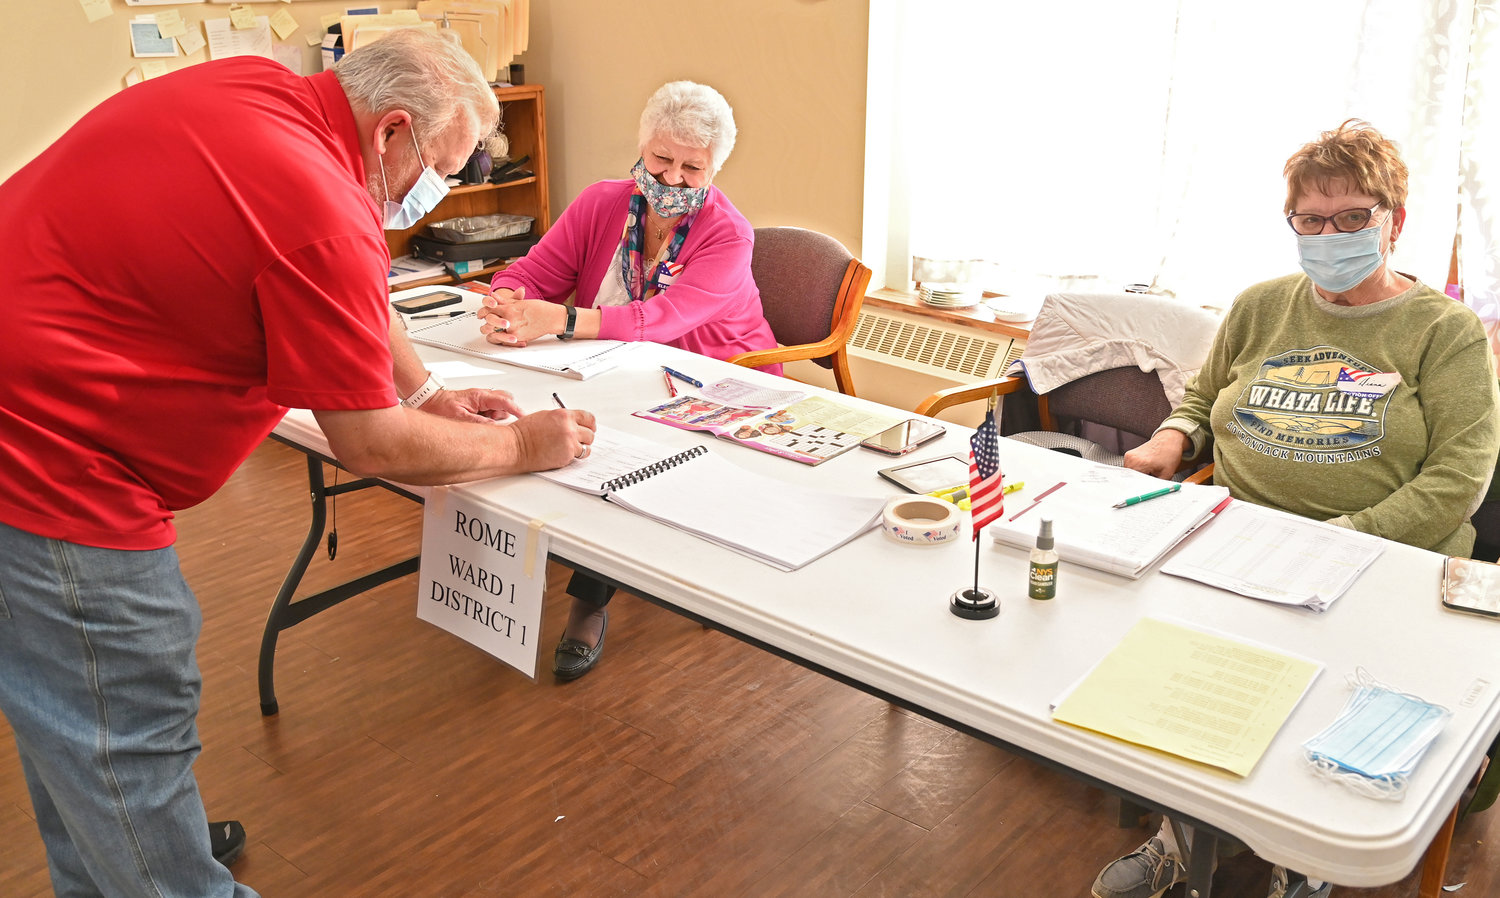 HELPING DEMOCRACY — A voter signs his name into the book while voting inspectors Patricia Johnson and Diana Dargenio looking on in the city’s Ward 1 in this November 2021 file photo from the polling station at the Copper City Community Connection, 305 E. Locust St. Oneida County elections officials are participating in a nationwide poll worker recruitment effort.